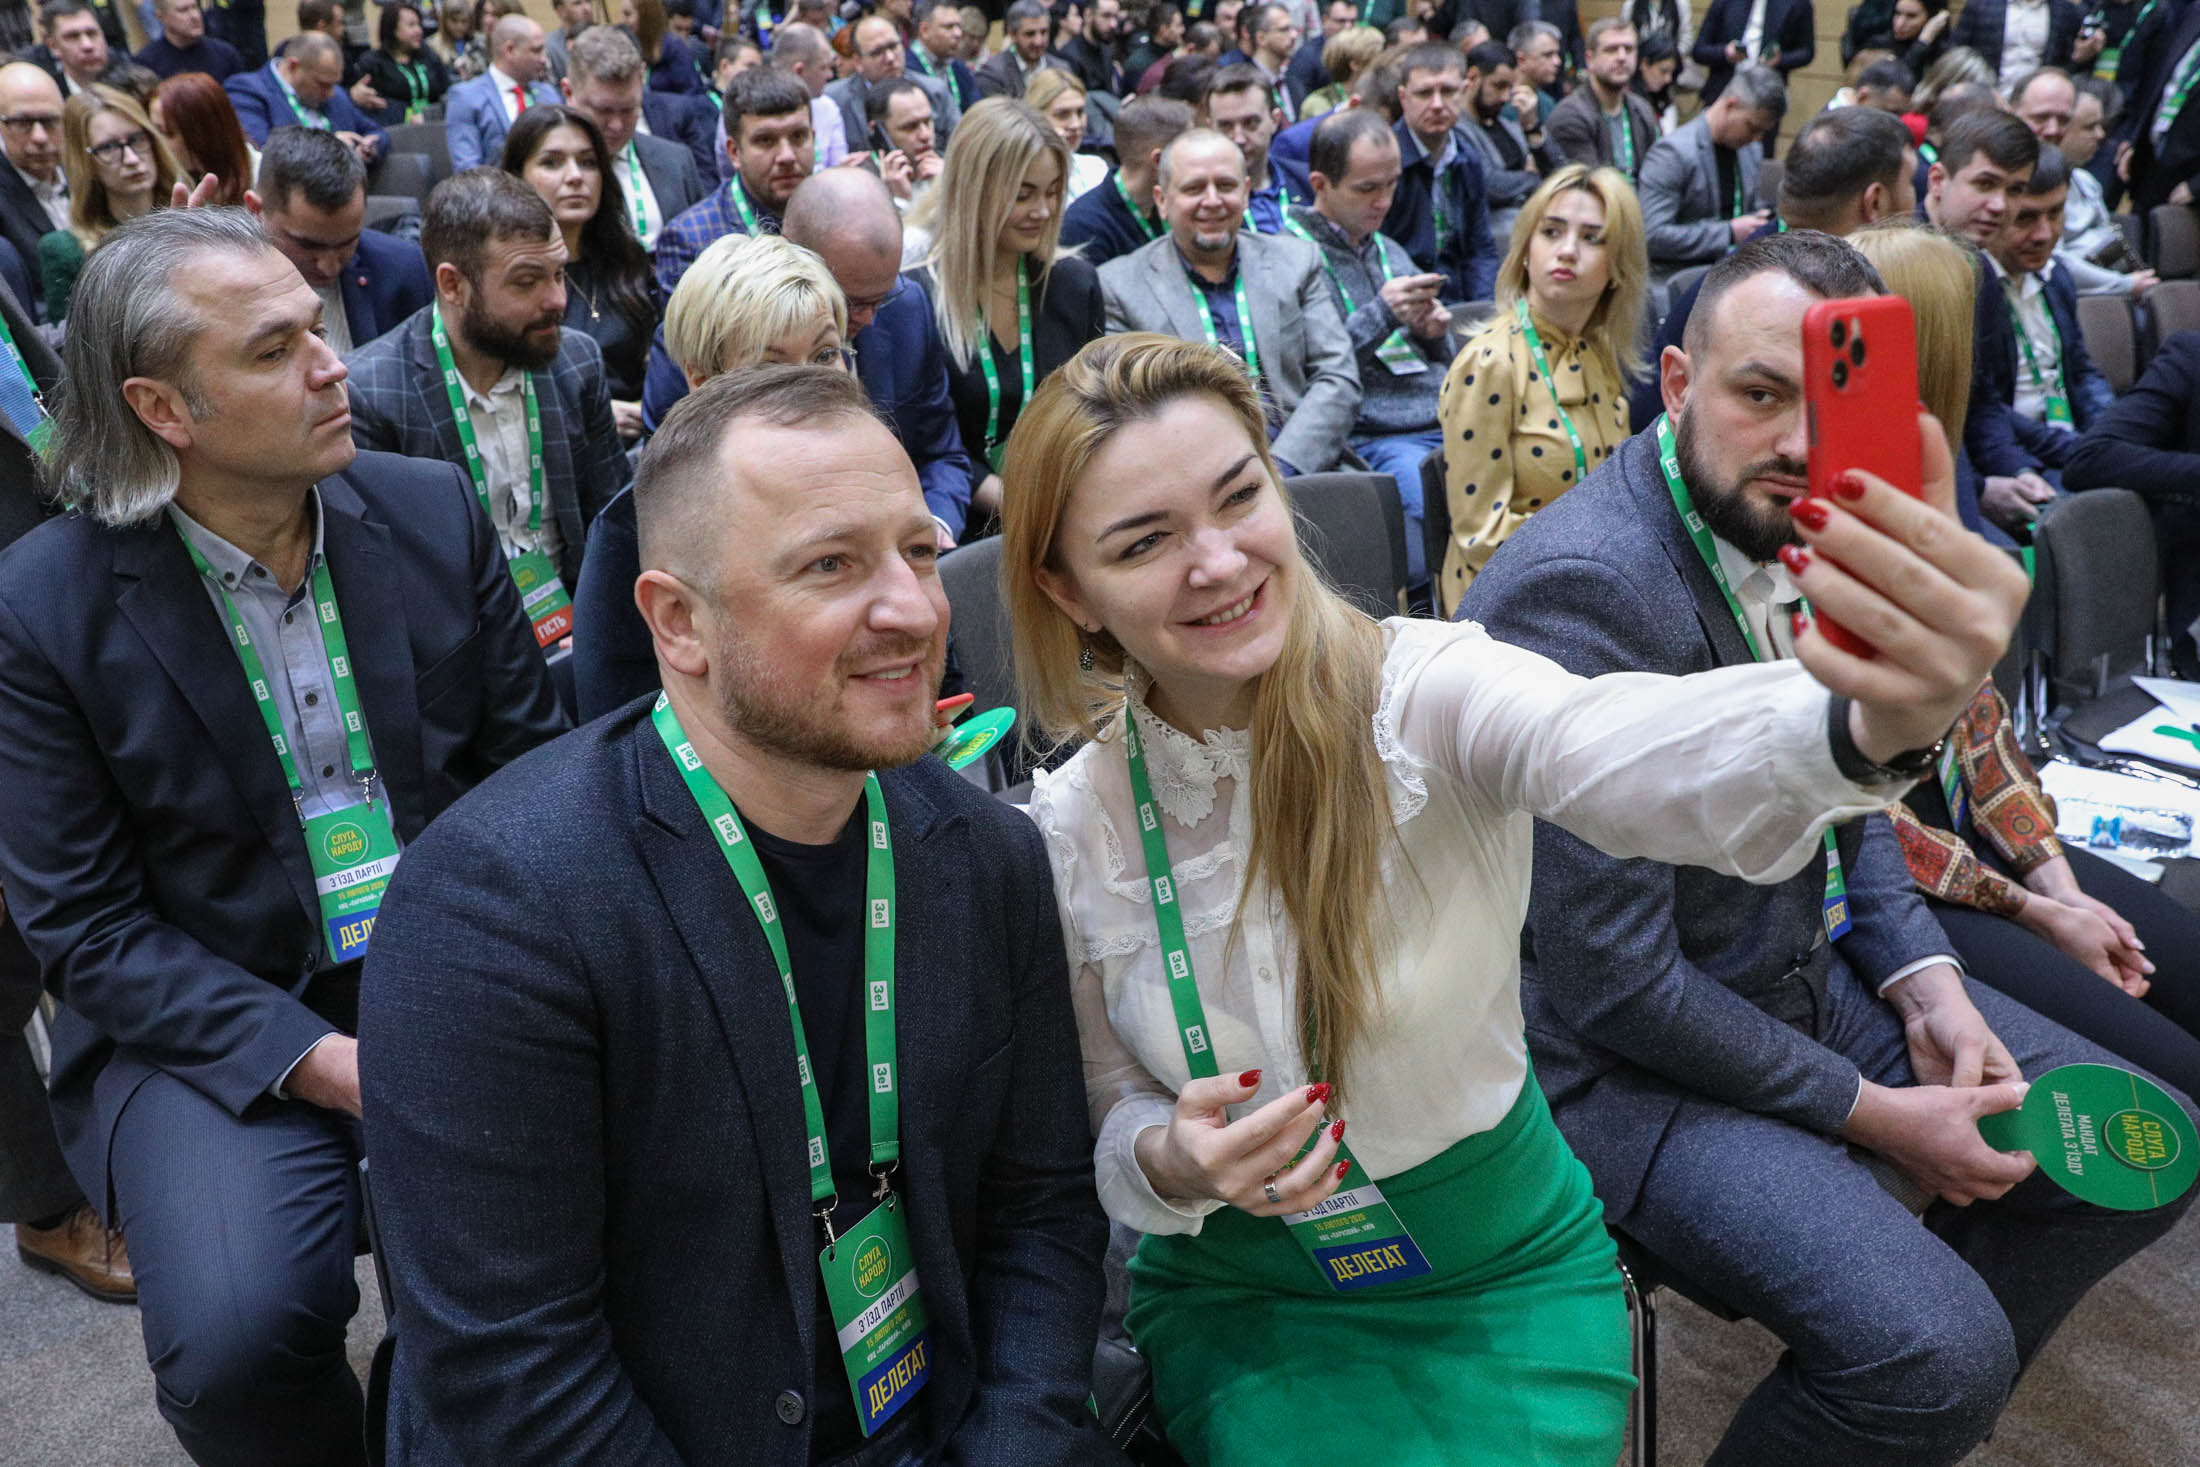 Party members take a selfie as they wait for the start of the Servant of the People party congress at the Parkovy convention center on Feb. 15, 2020.